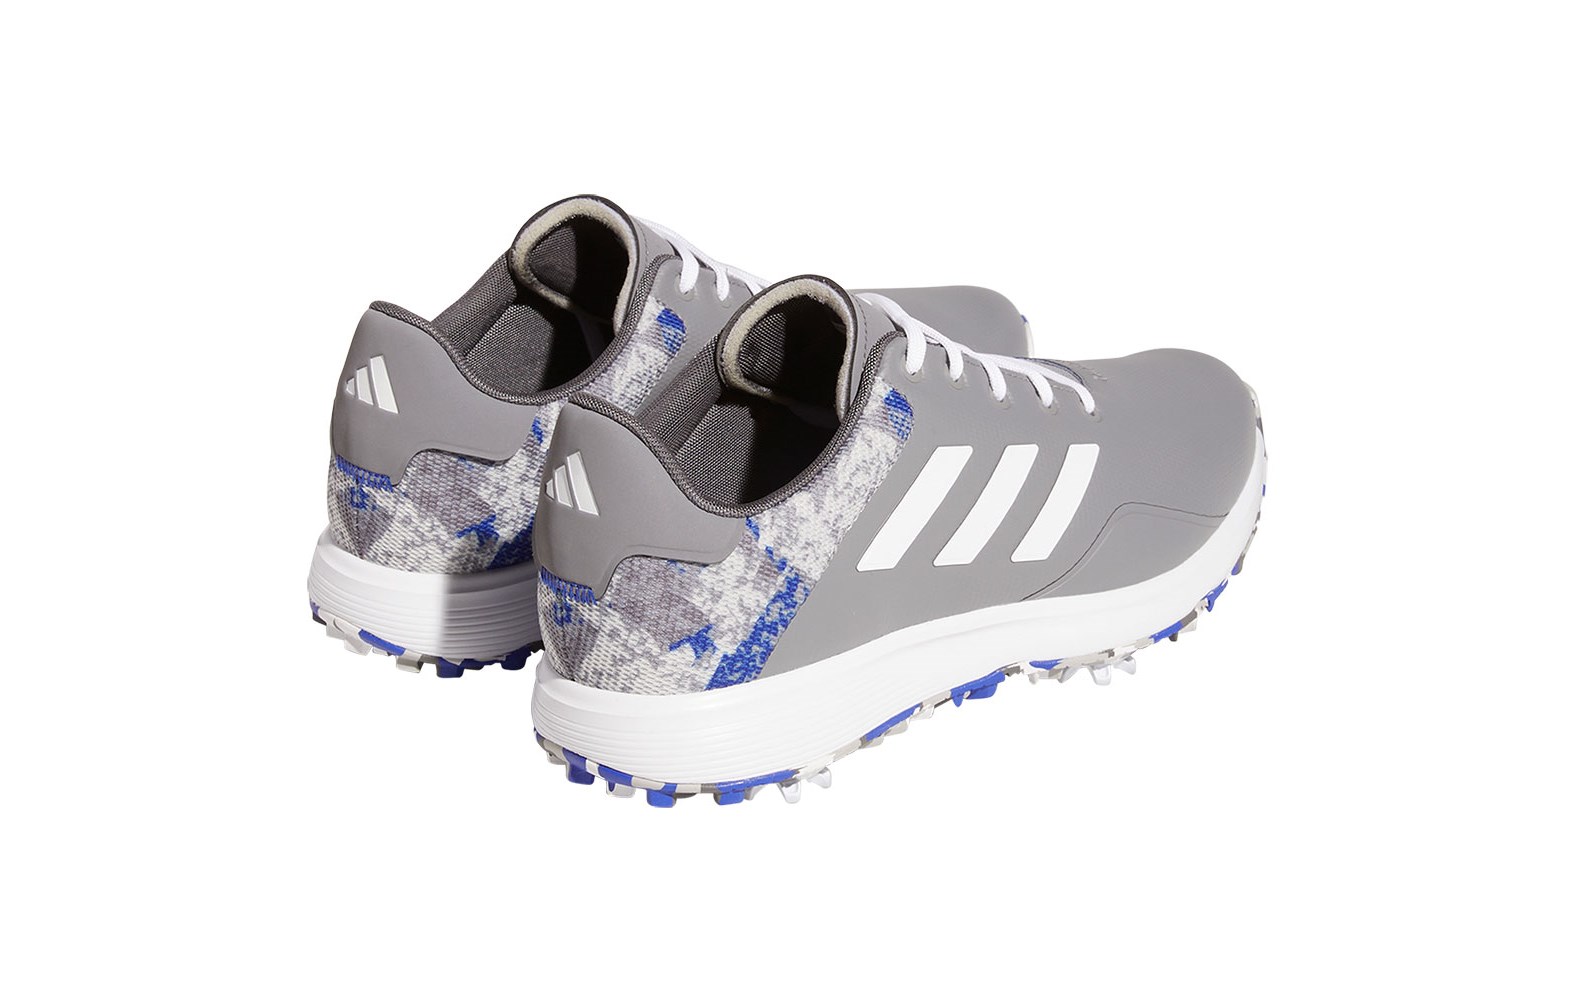 adidas Mens S2G Spiked Golf Shoes - Golfonline